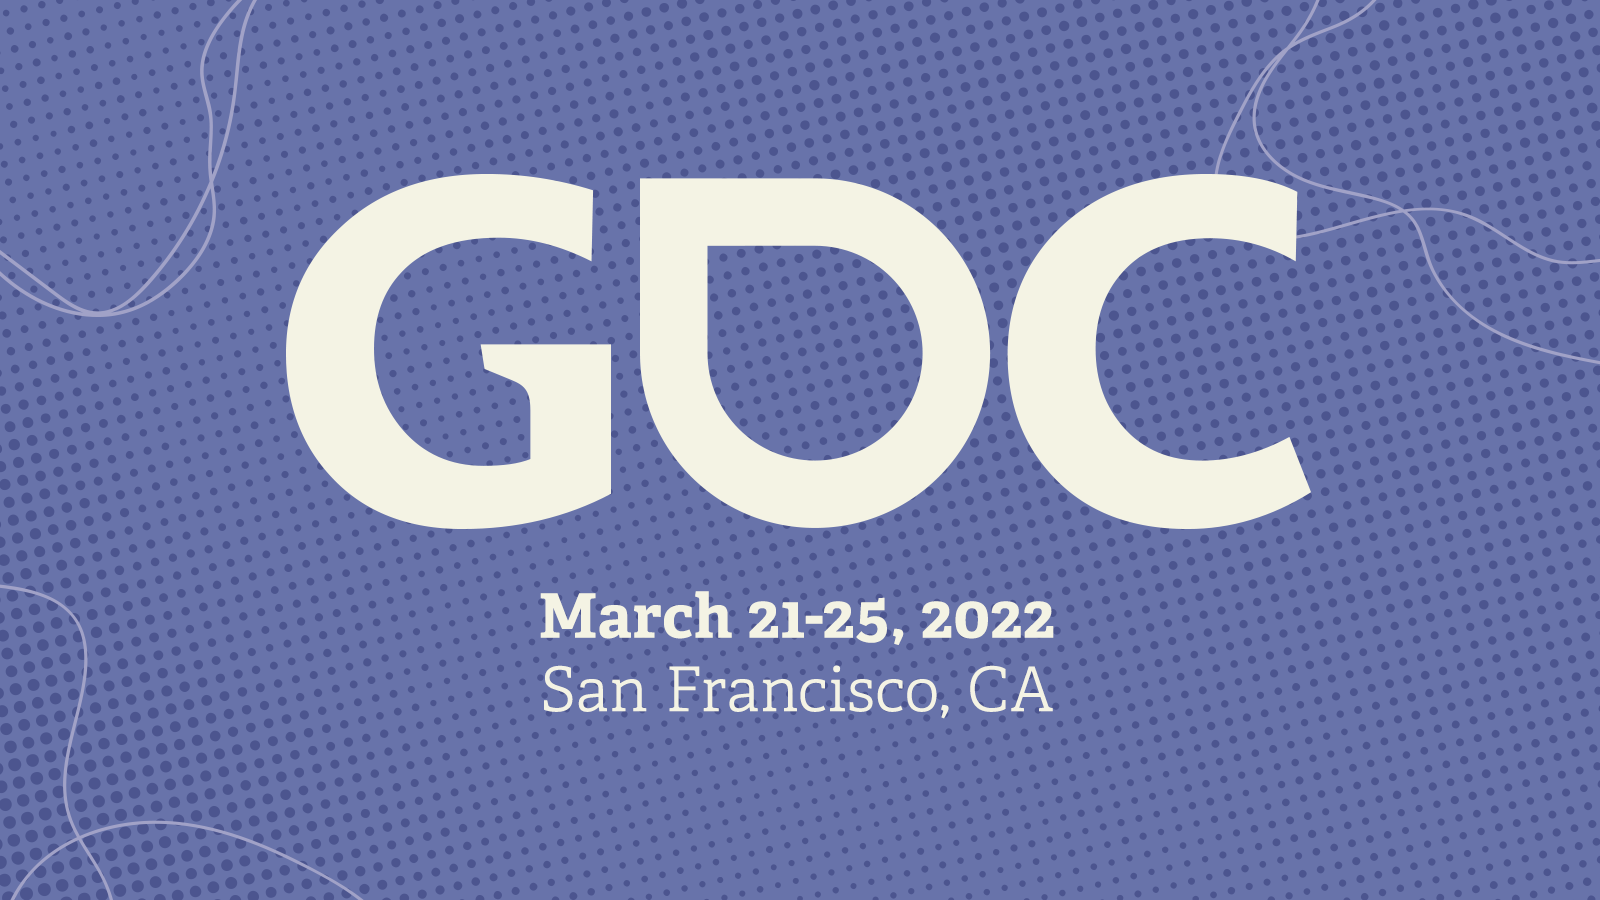 The Full GDC 2022 InPerson and Virtual Schedule Is Now Live News